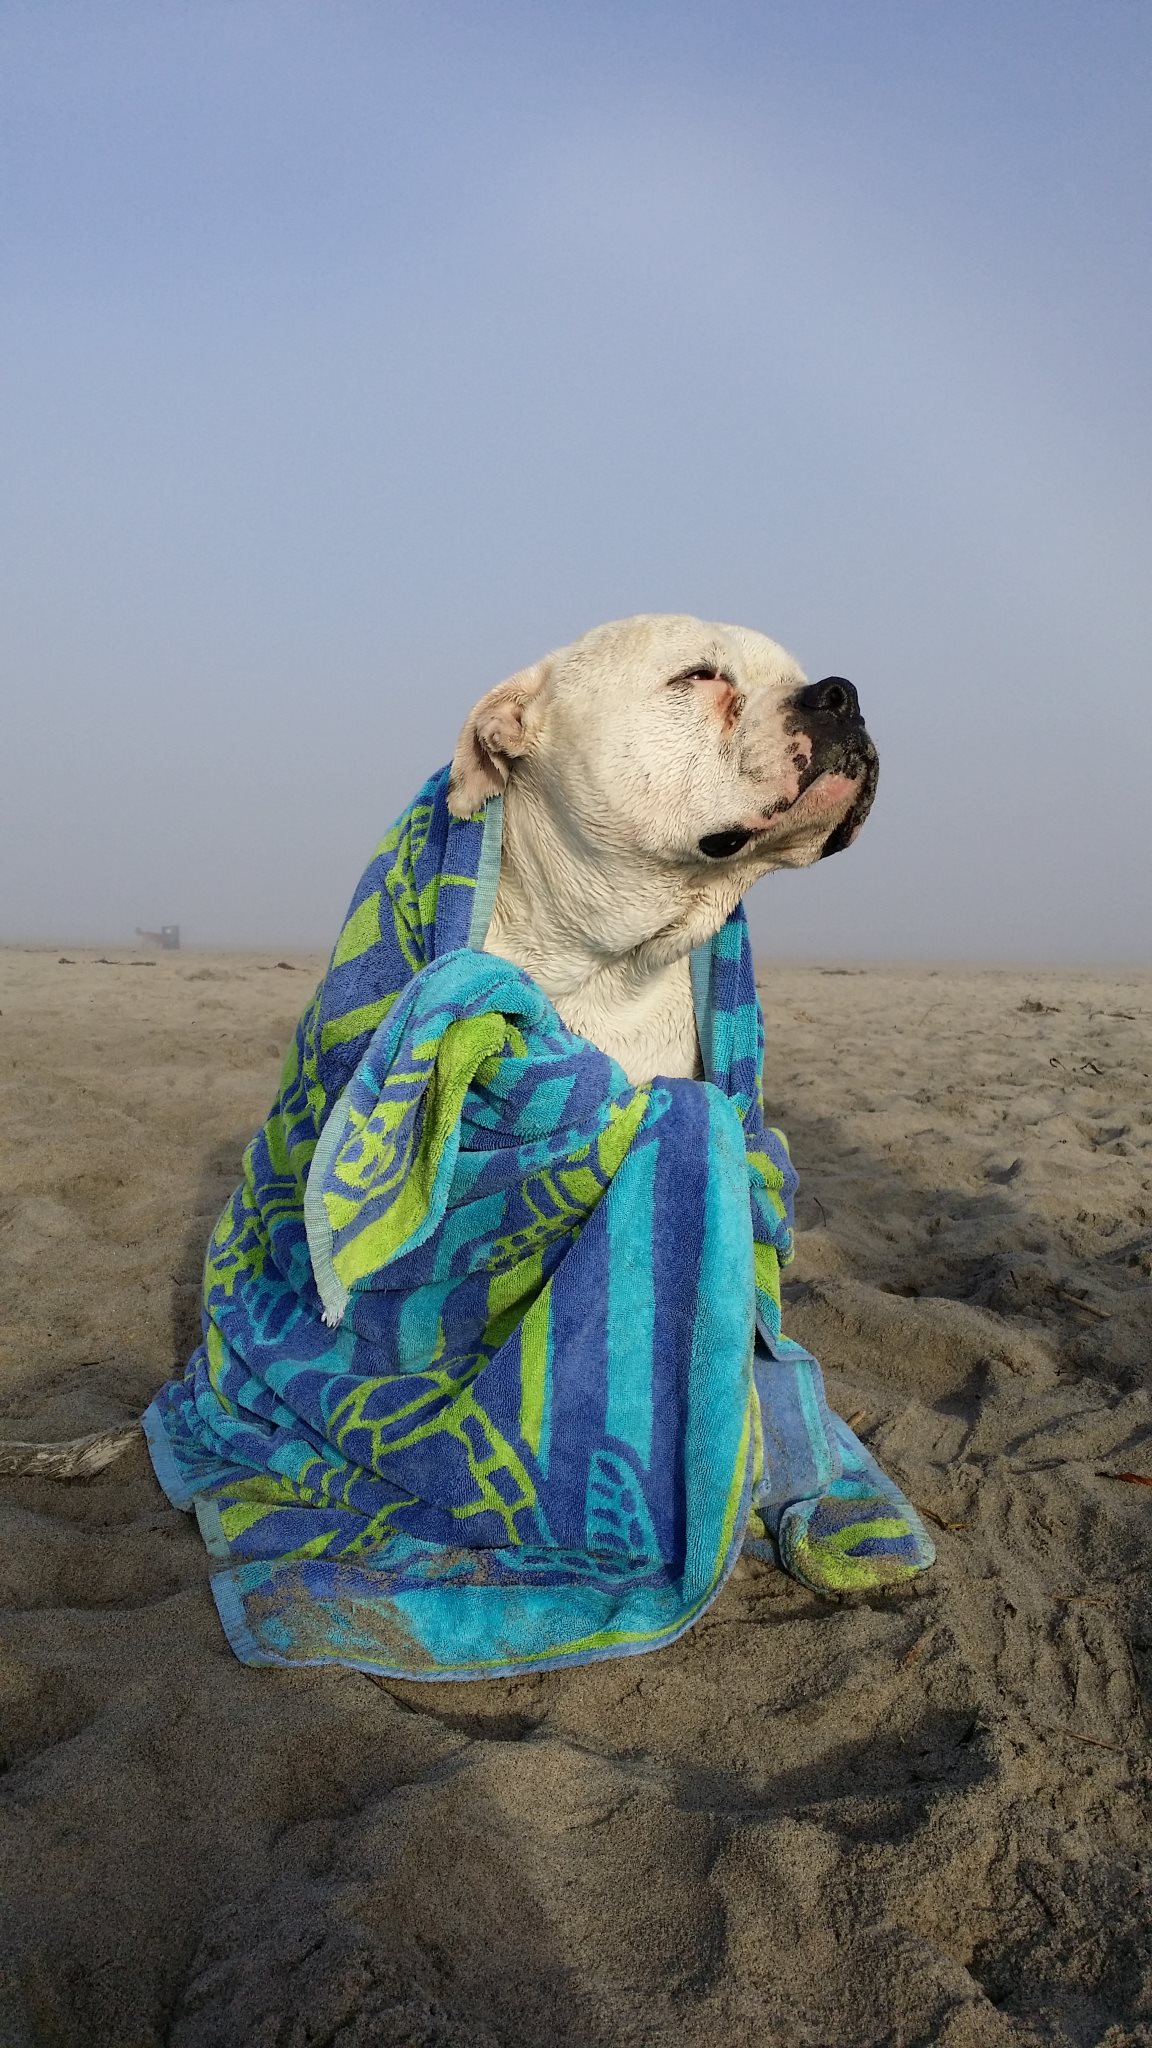 Josephine enjoys the breeze after playing on the beach. (Sonya Timko)